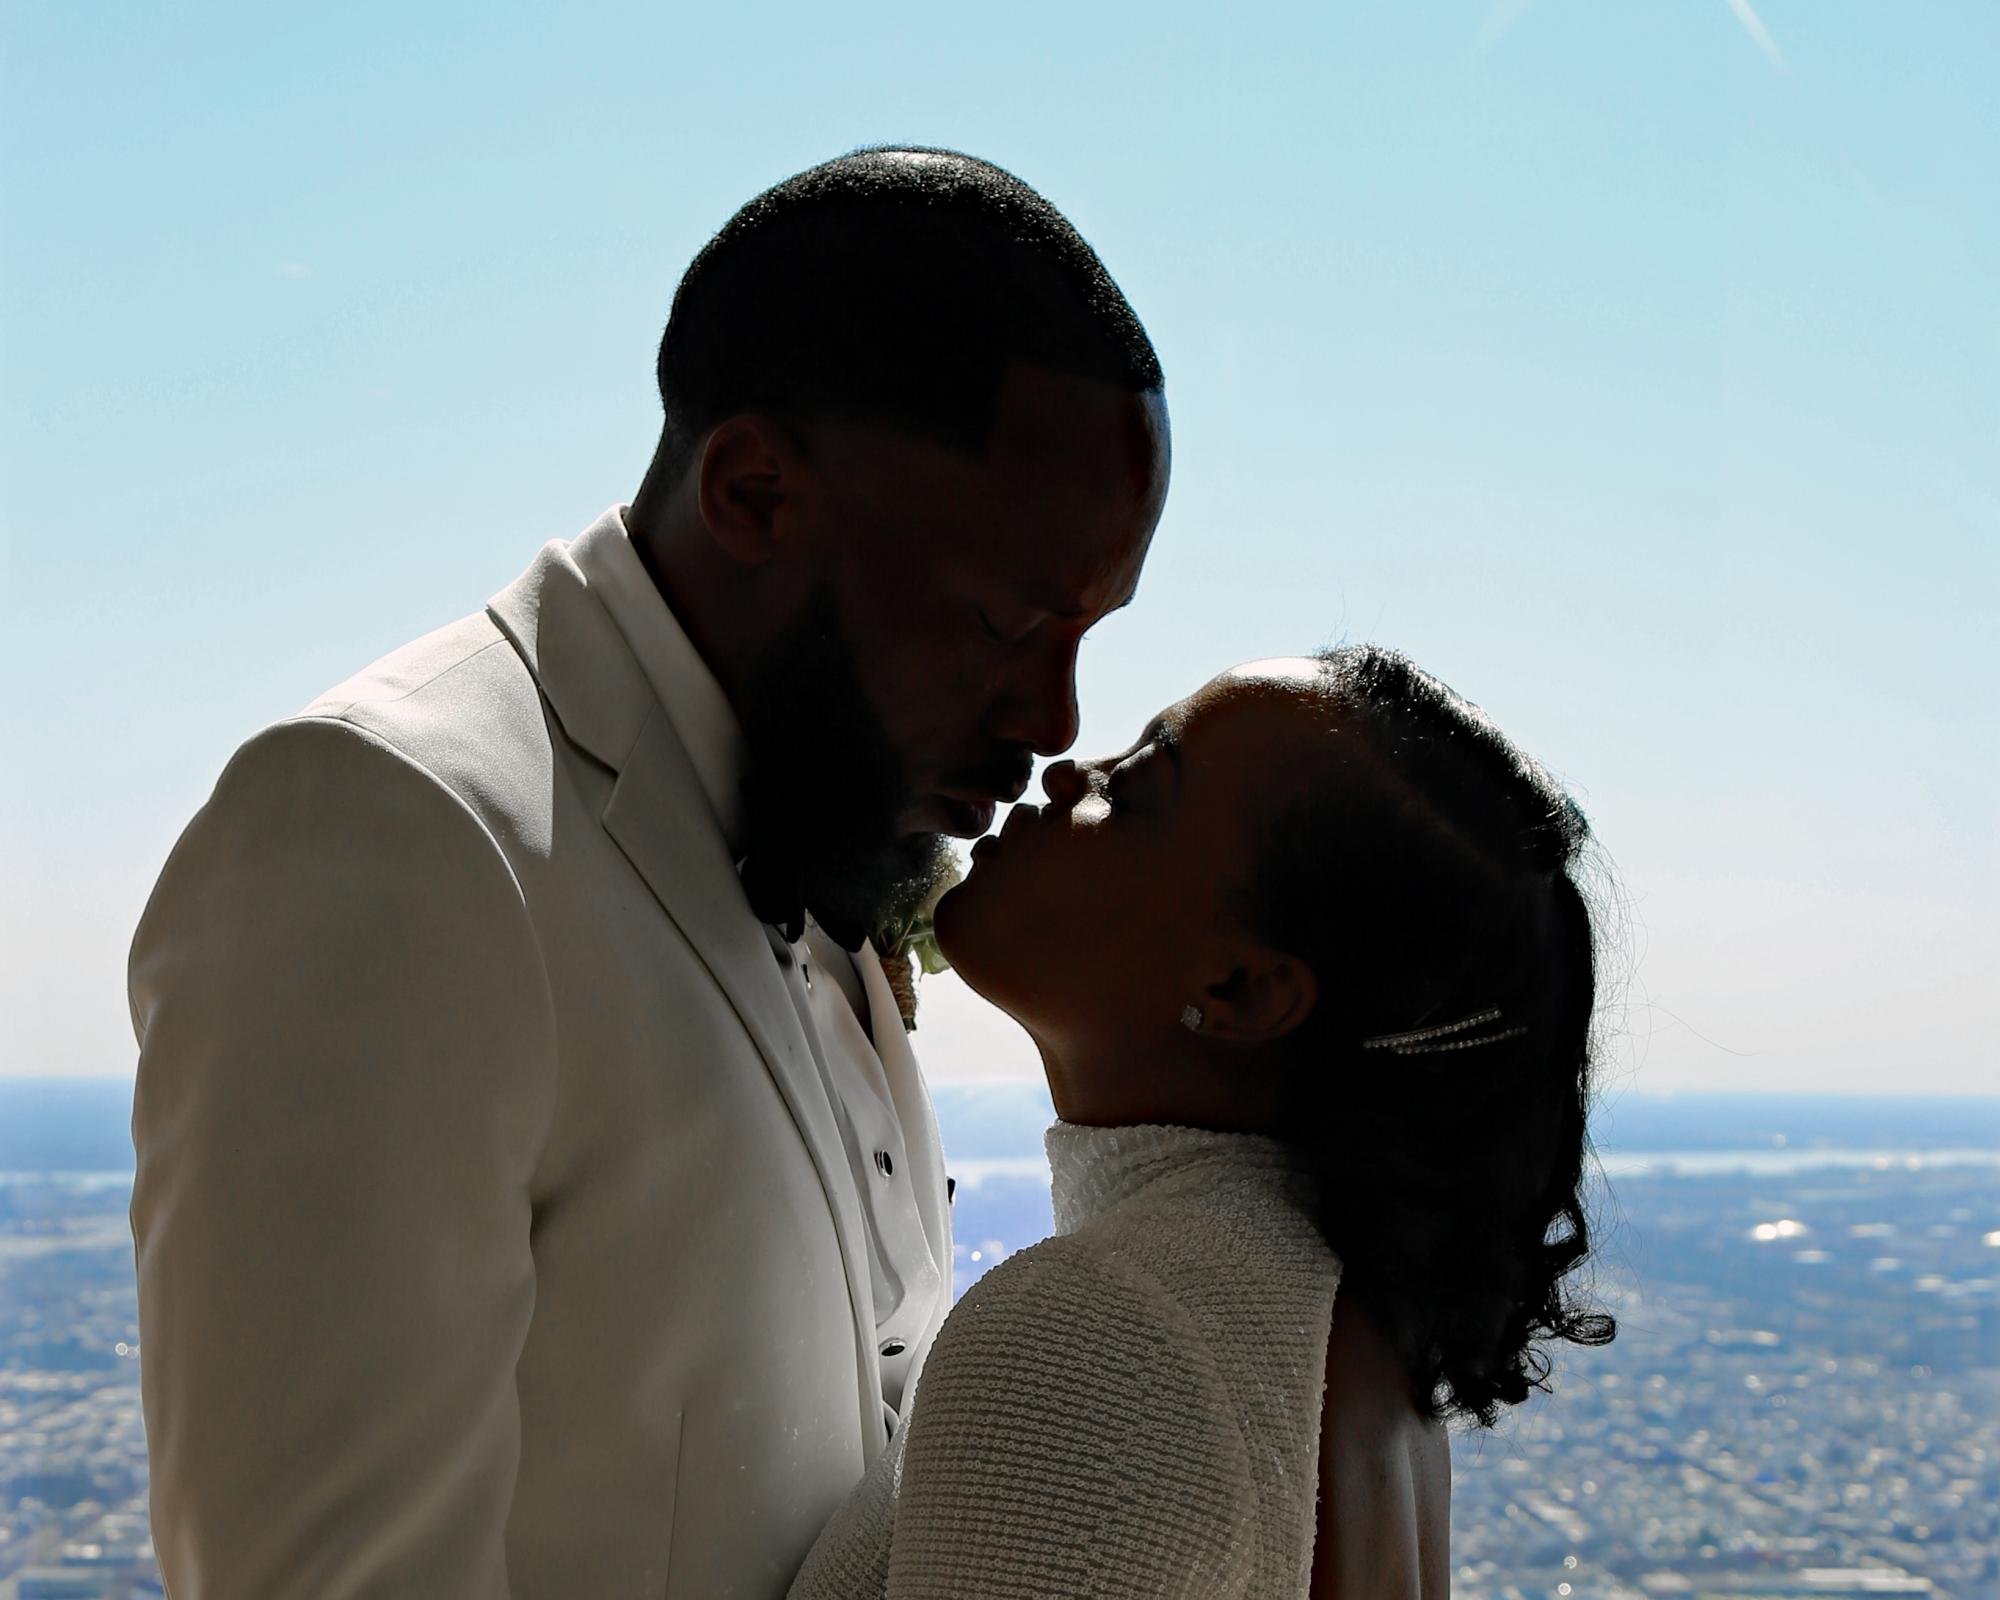 Photography by Angel at Tylerstar Productions. This photo of the Bride and Groom Silhouette was taken at the Four Seasons Hotel in Philadelphia, PA